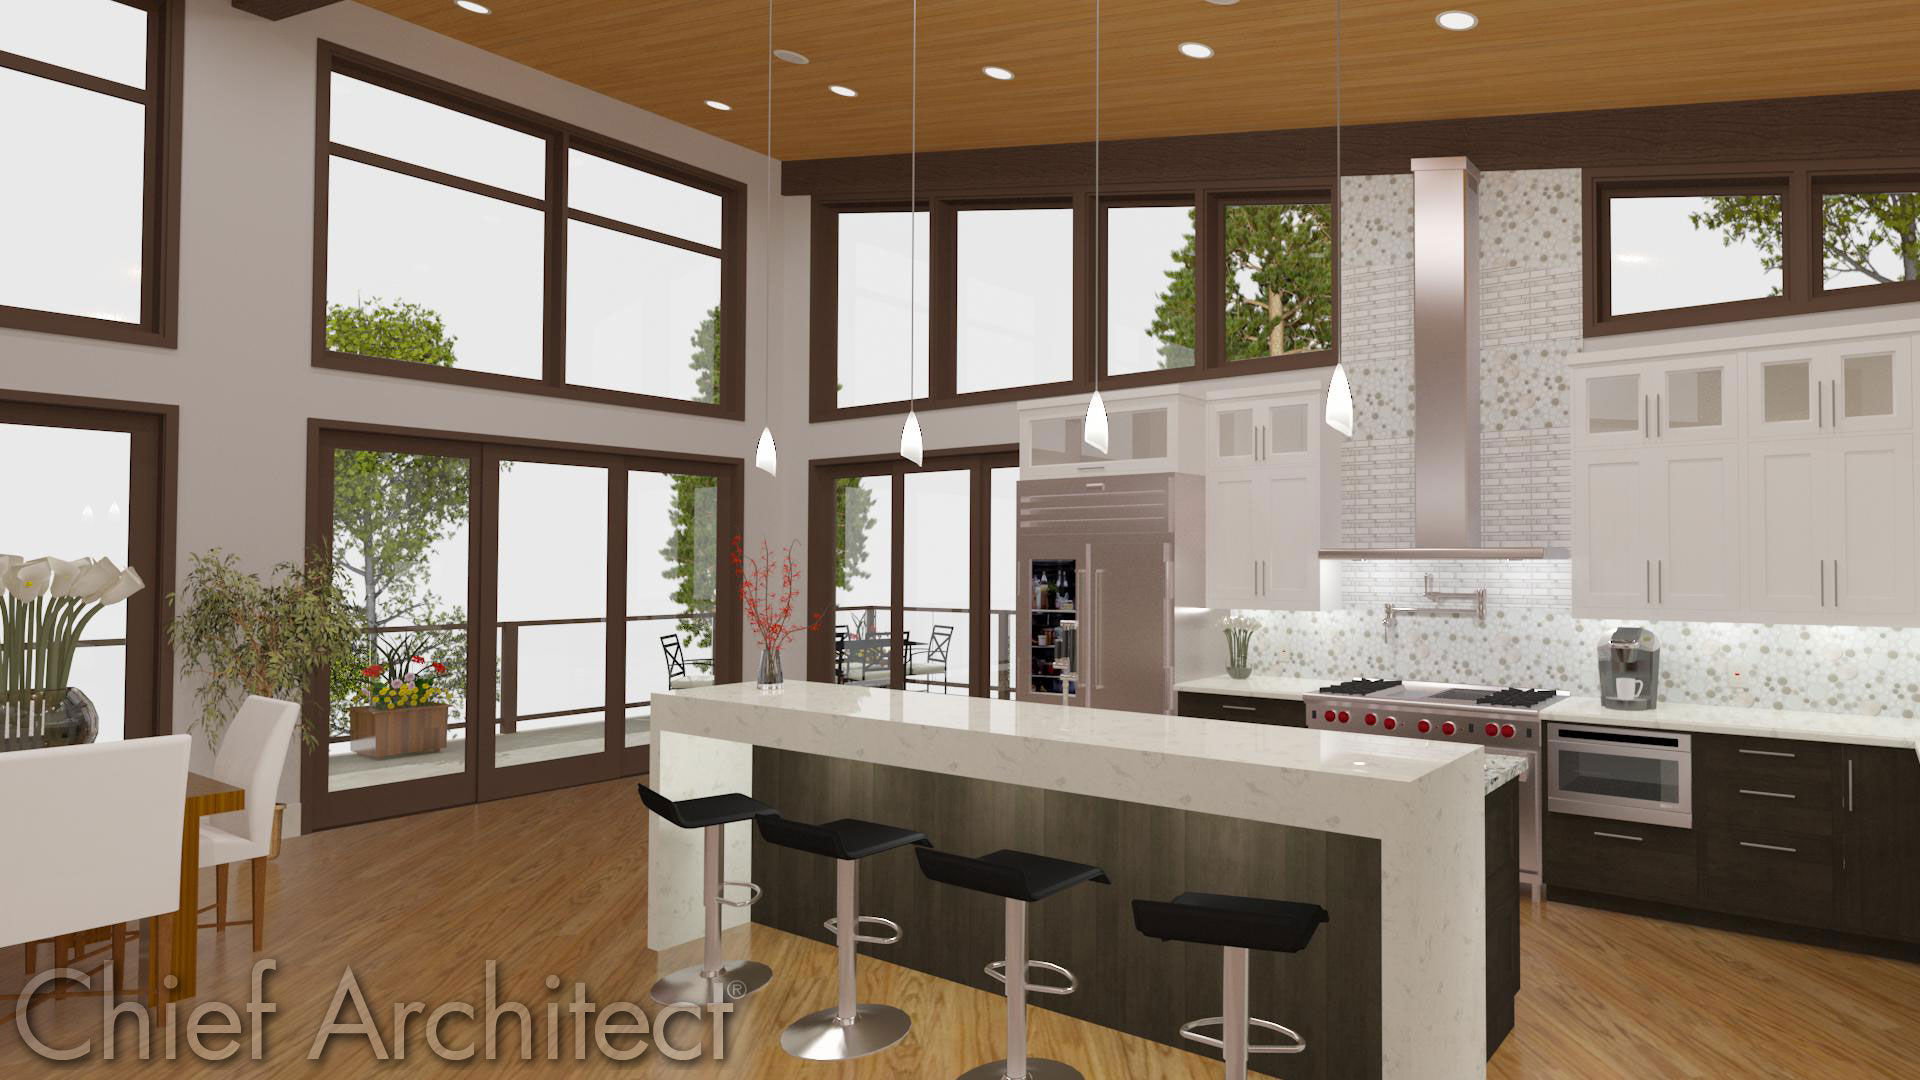 Samples Gallery | Chief Architect